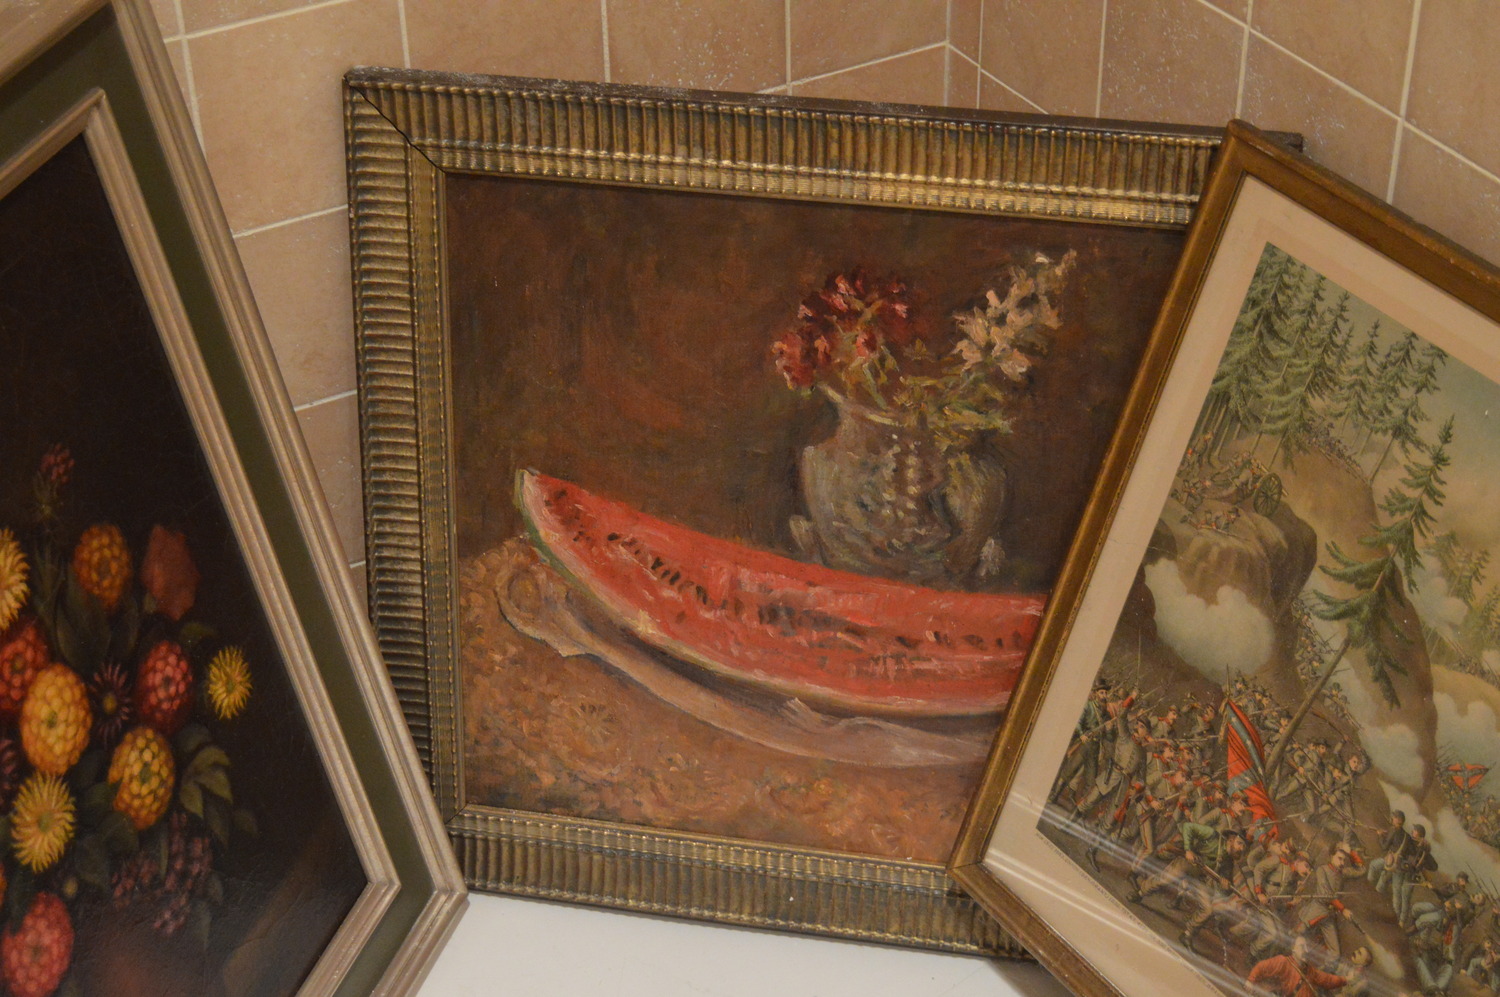 Restored paintings emerge from nearly every nook and cranny of the Di Benedetto home. TOM GOGOLA